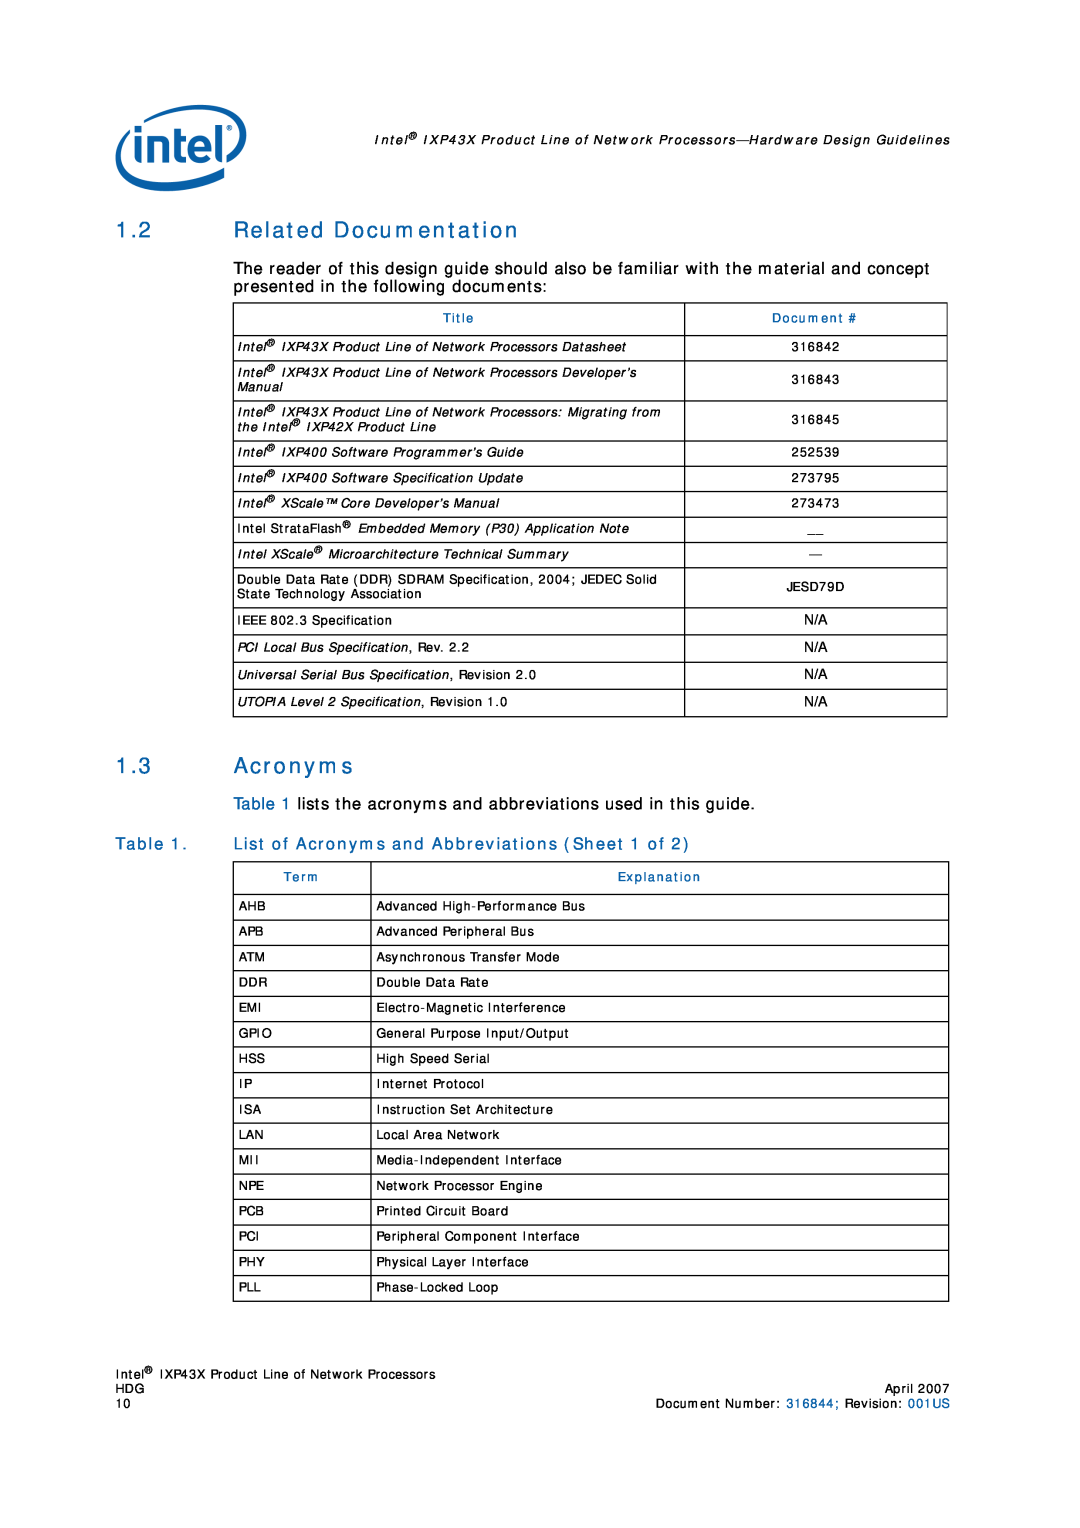 Intel IXP43X manual Related Documentation, List of Acronyms and Abbreviations Sheet 1 of, Title, Document #, Manual 